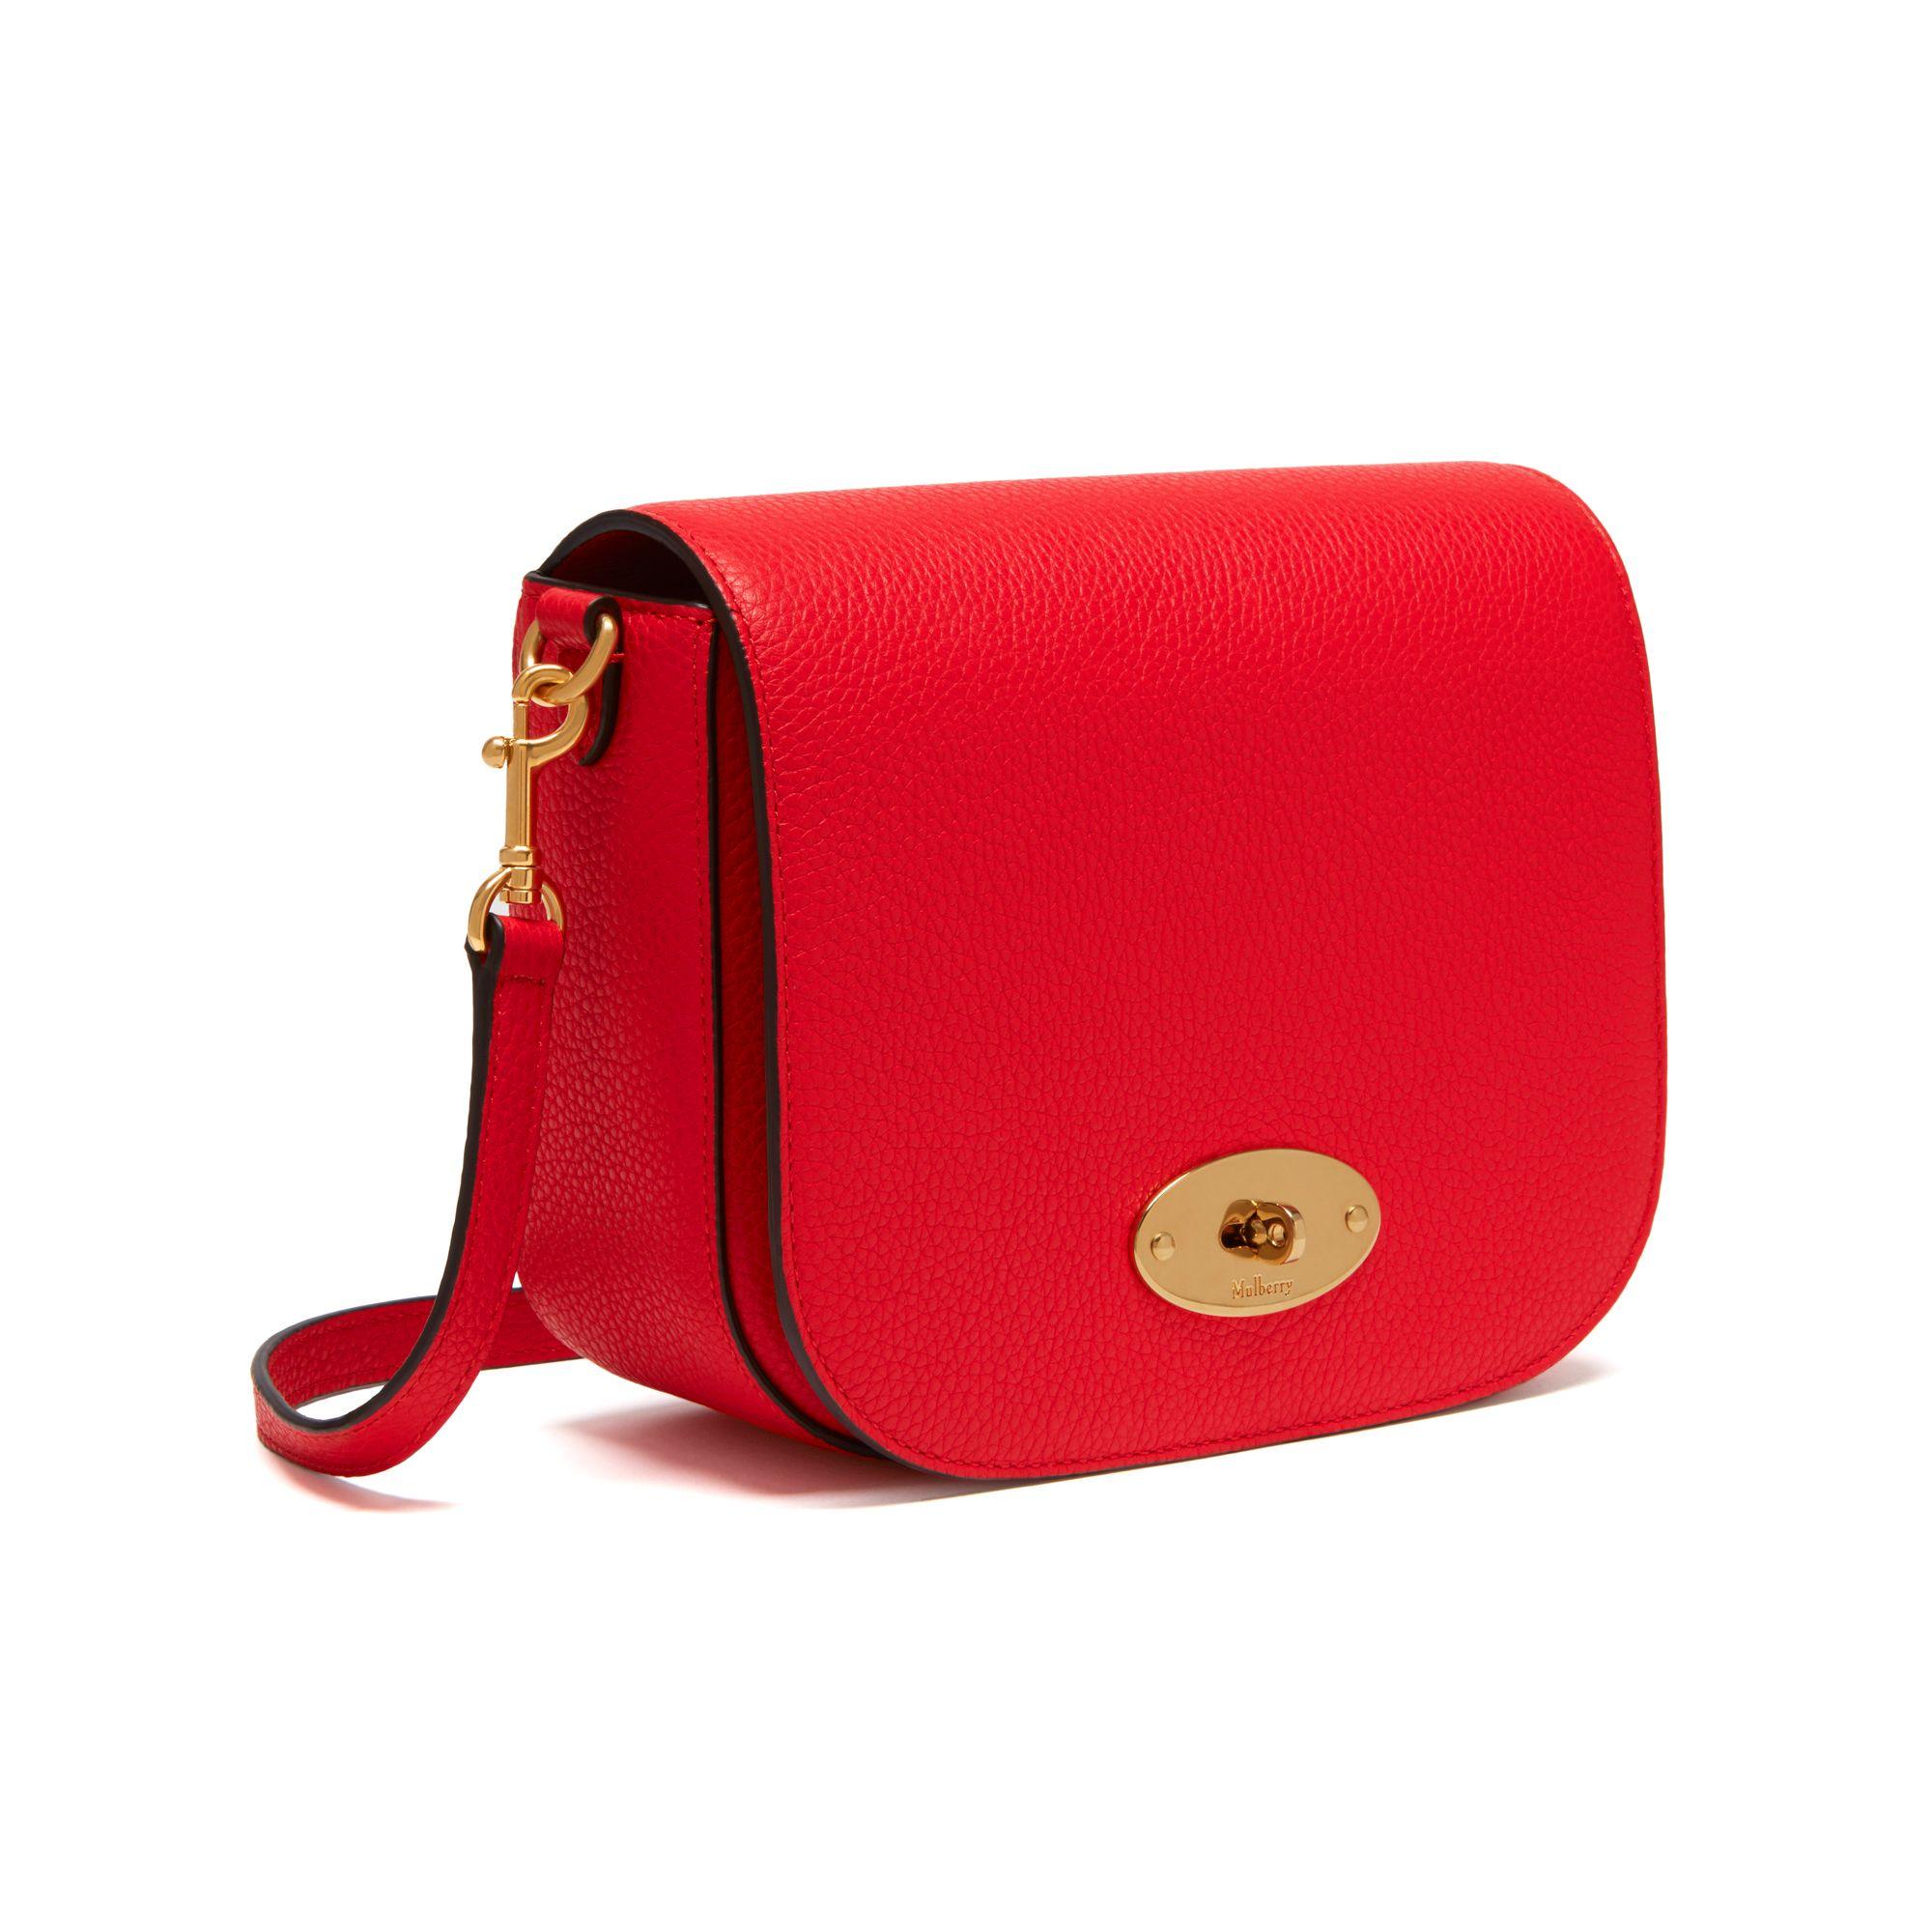 Small Satchel in Red | Lyst Australia